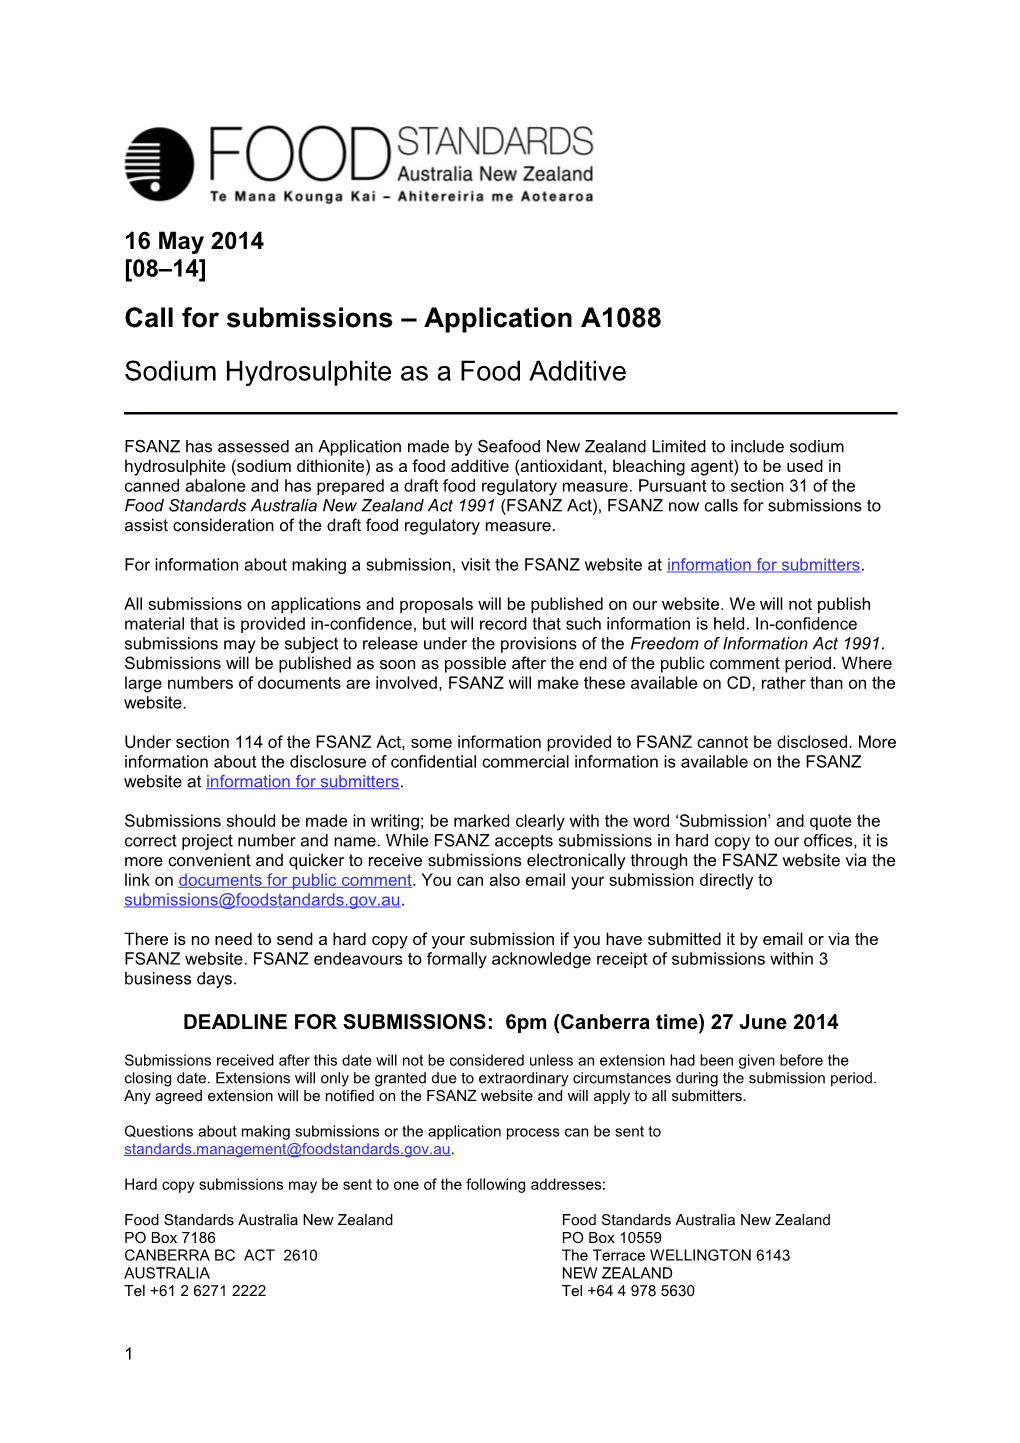 Callforsubmissions Application A1088